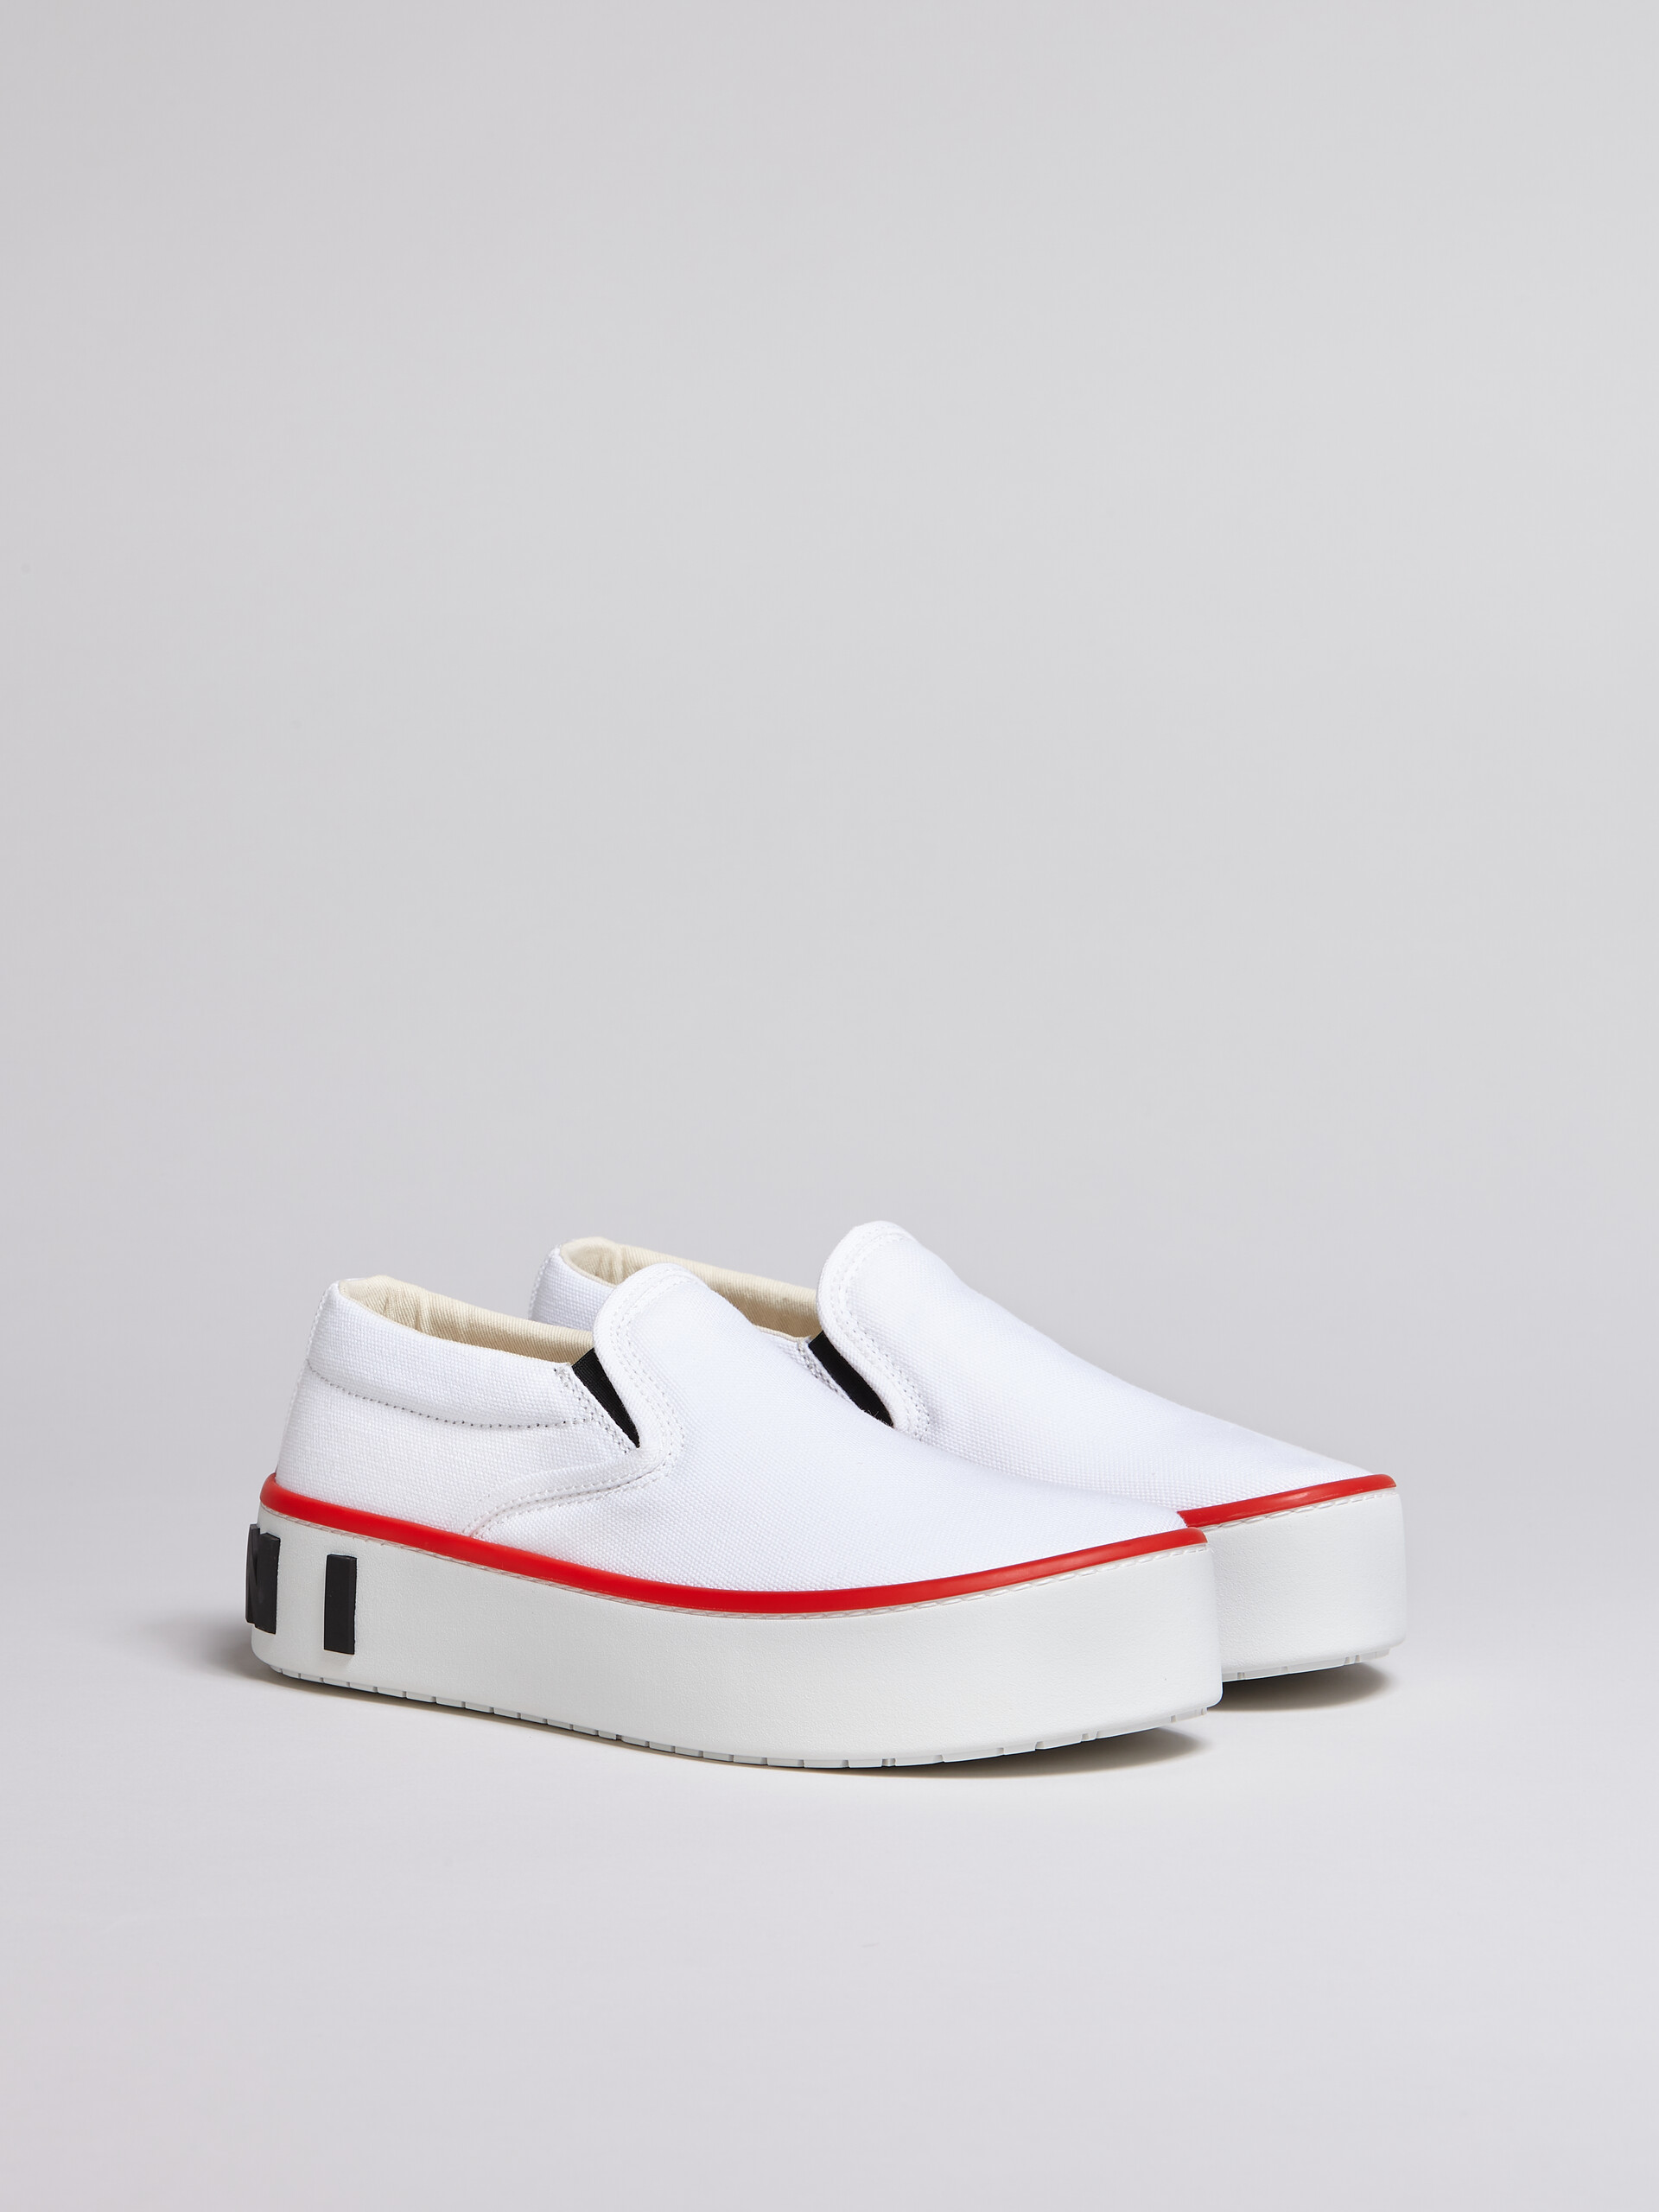 Sneaker PAW in canvas bianco con maxi logo - Sneakers - Image 2